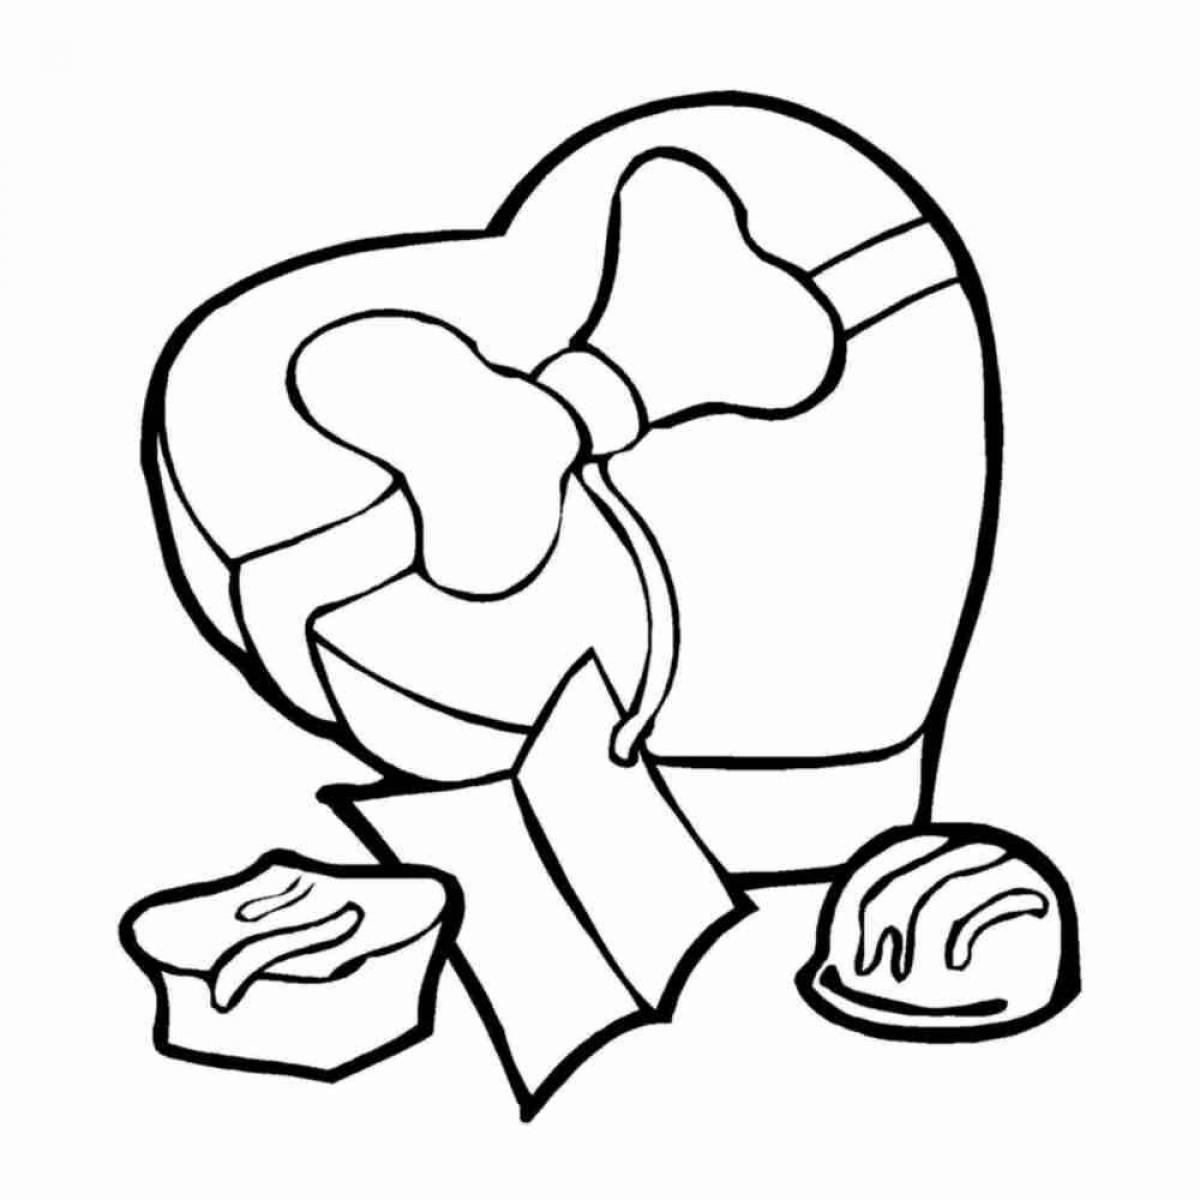 Spicy candy coloring pages